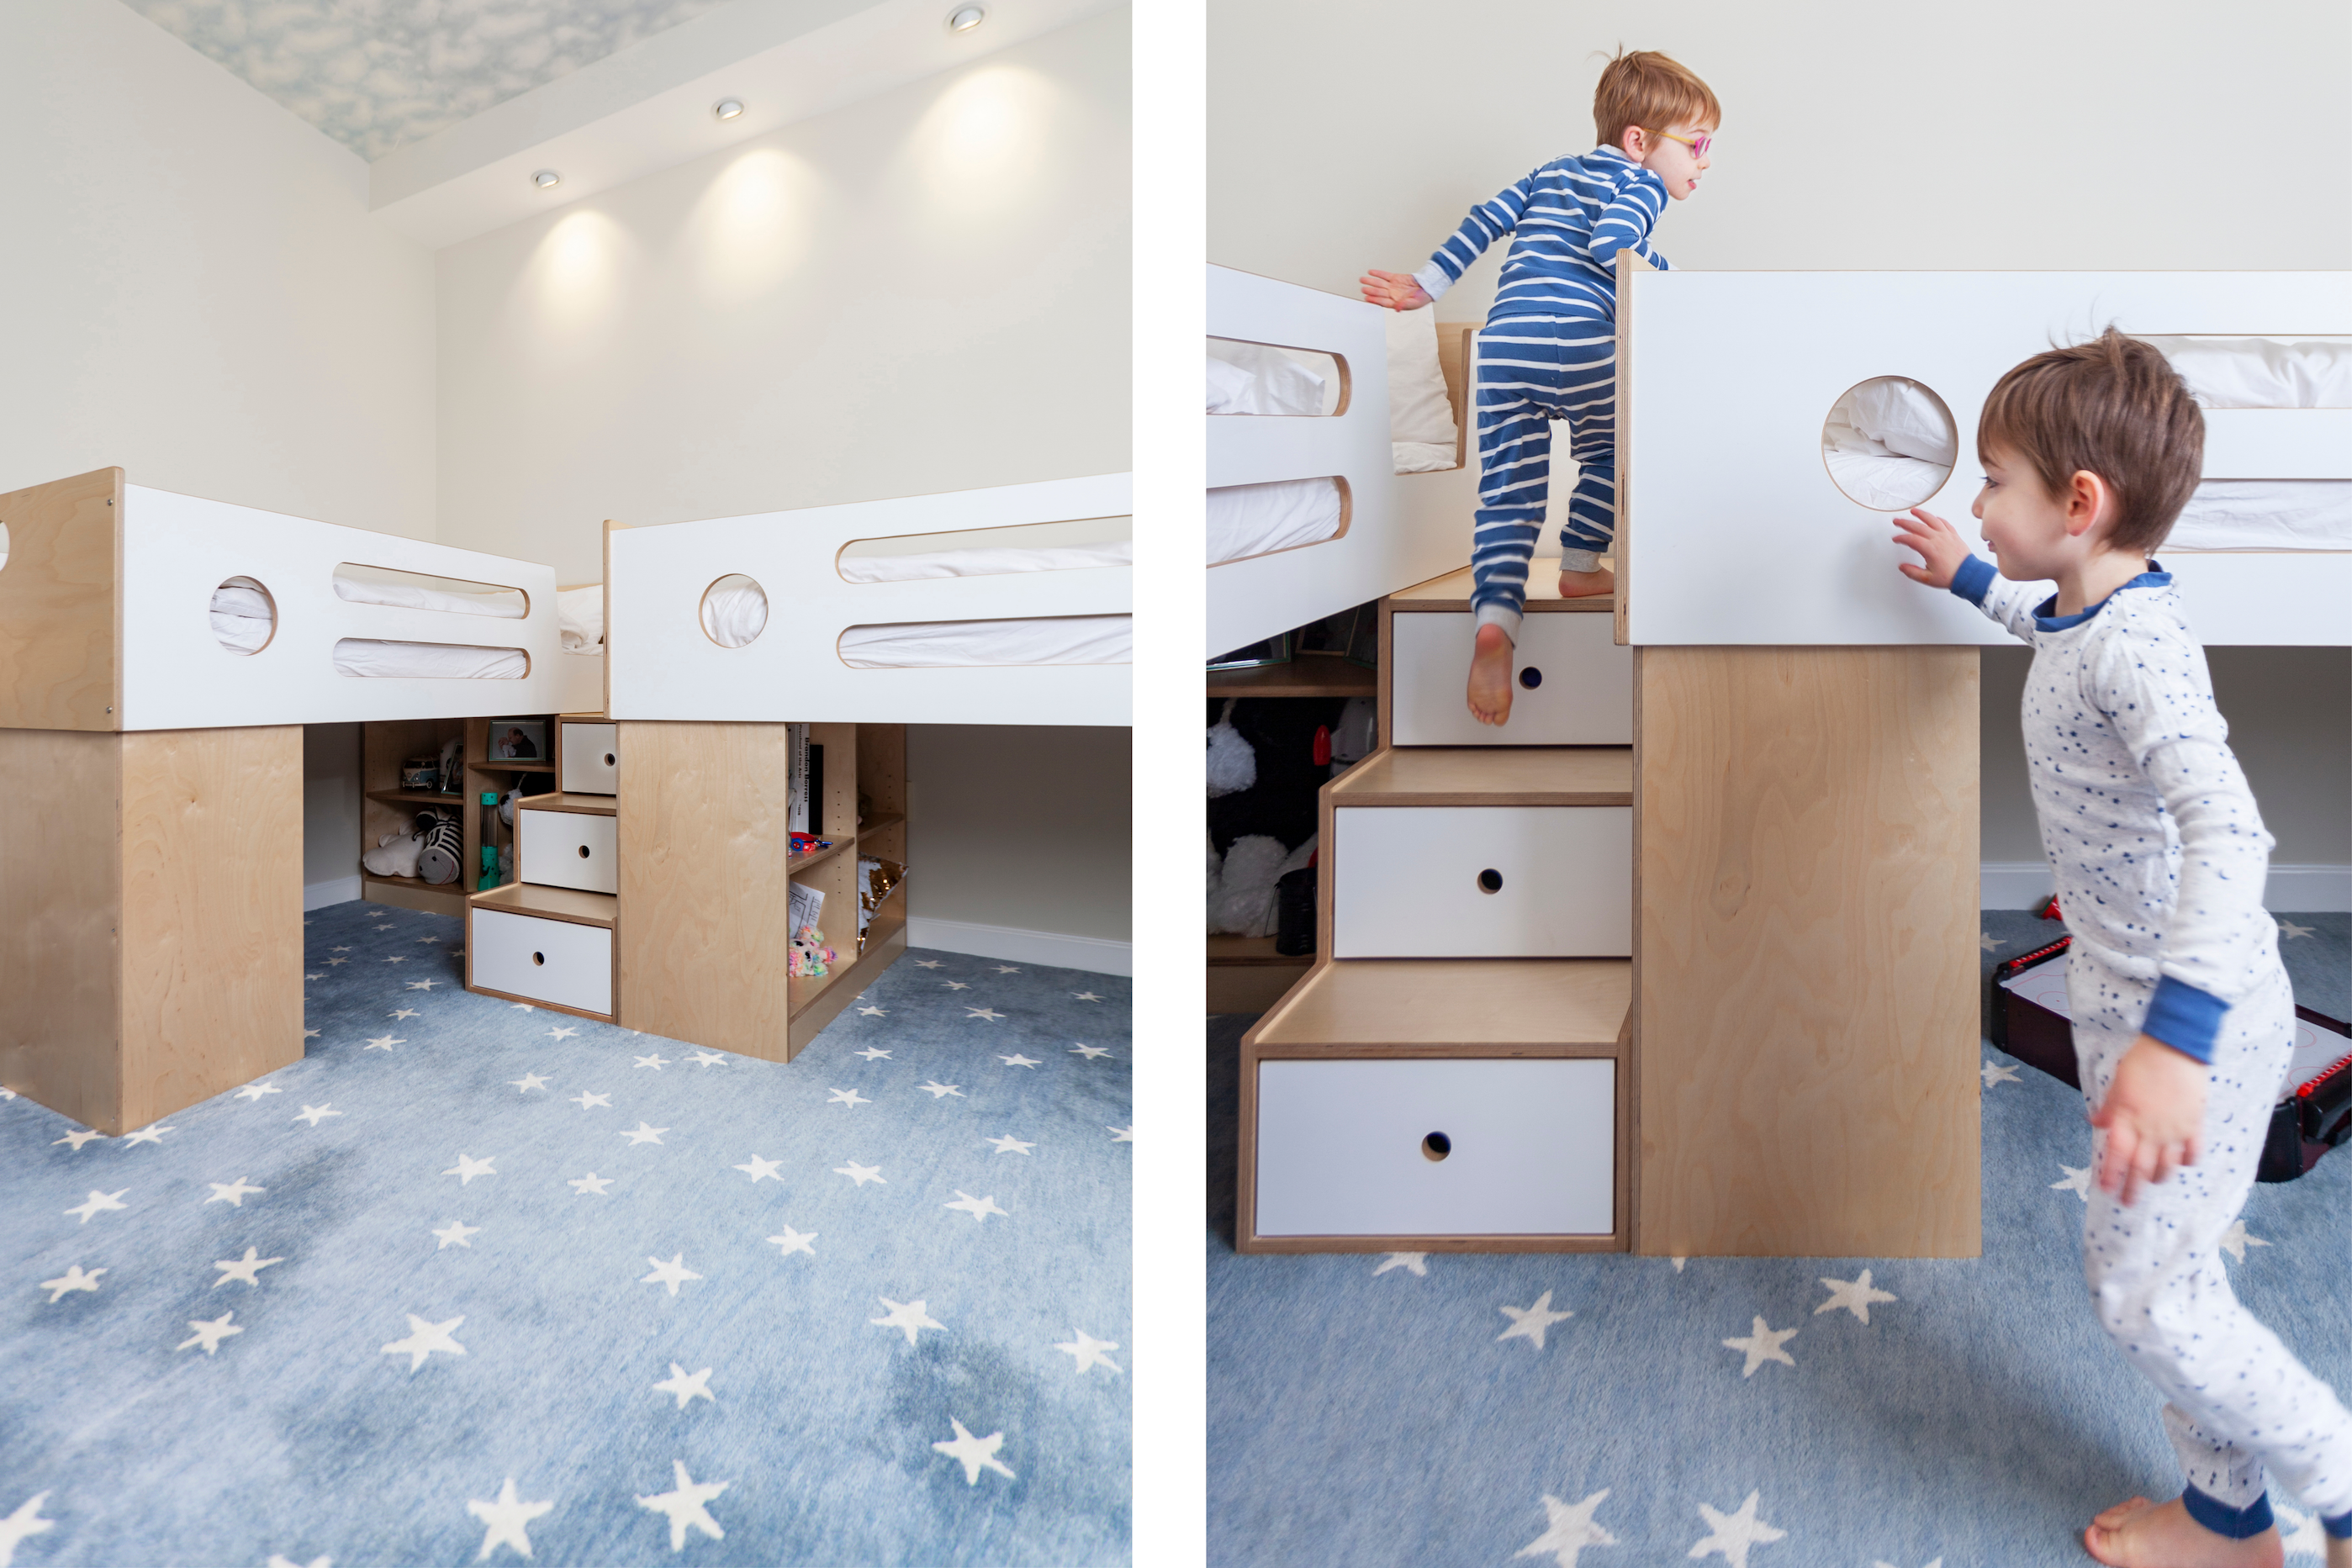 Collage of images: left, a child's room with twin beds and a carpet; right, a boy playing on steps built into a bed.